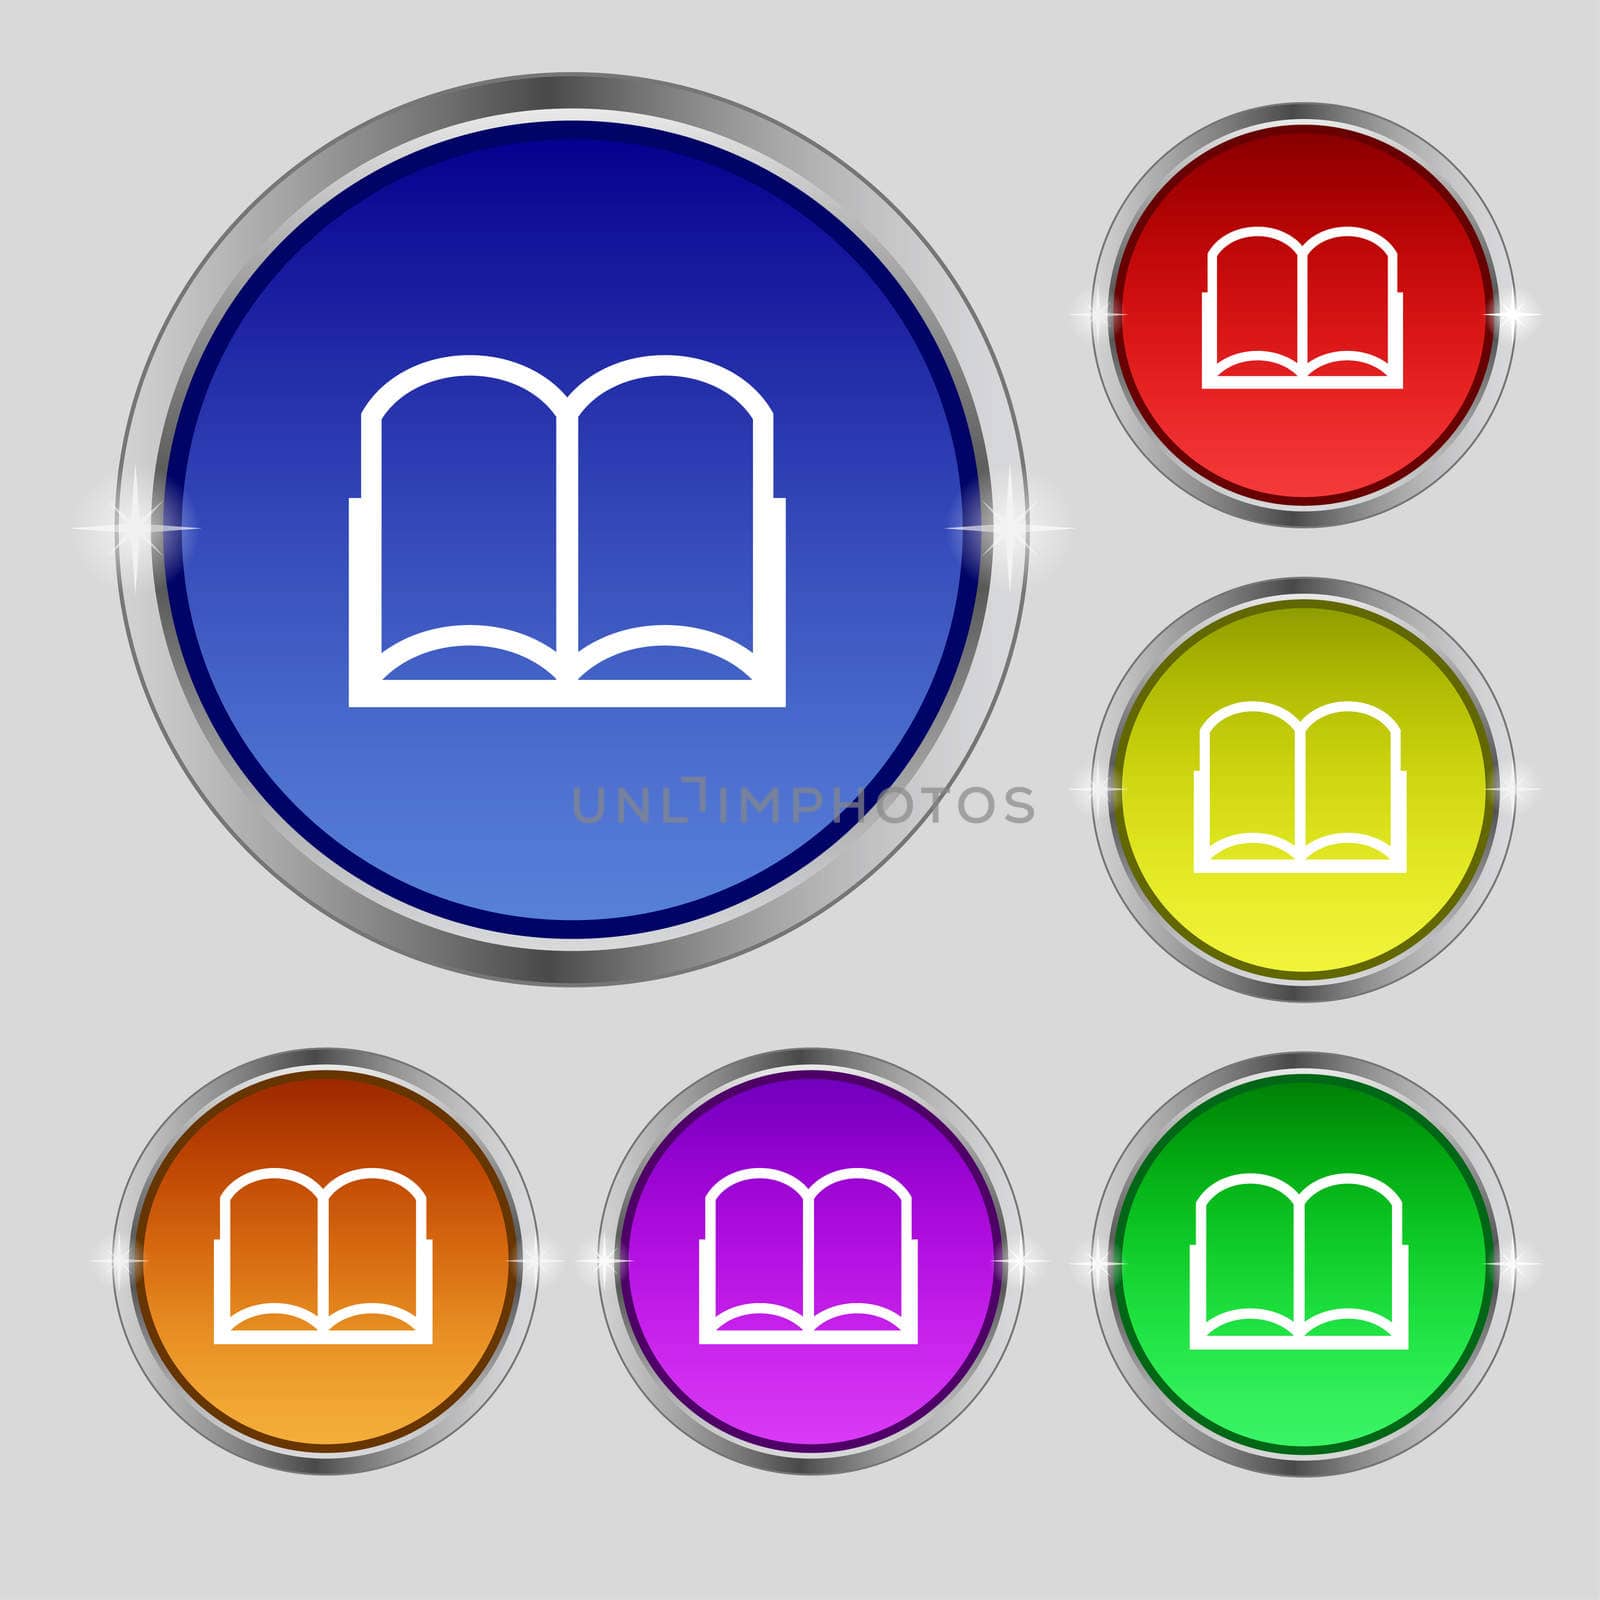 Book sign icon. Open book symbol. Set of colored buttons. illustration